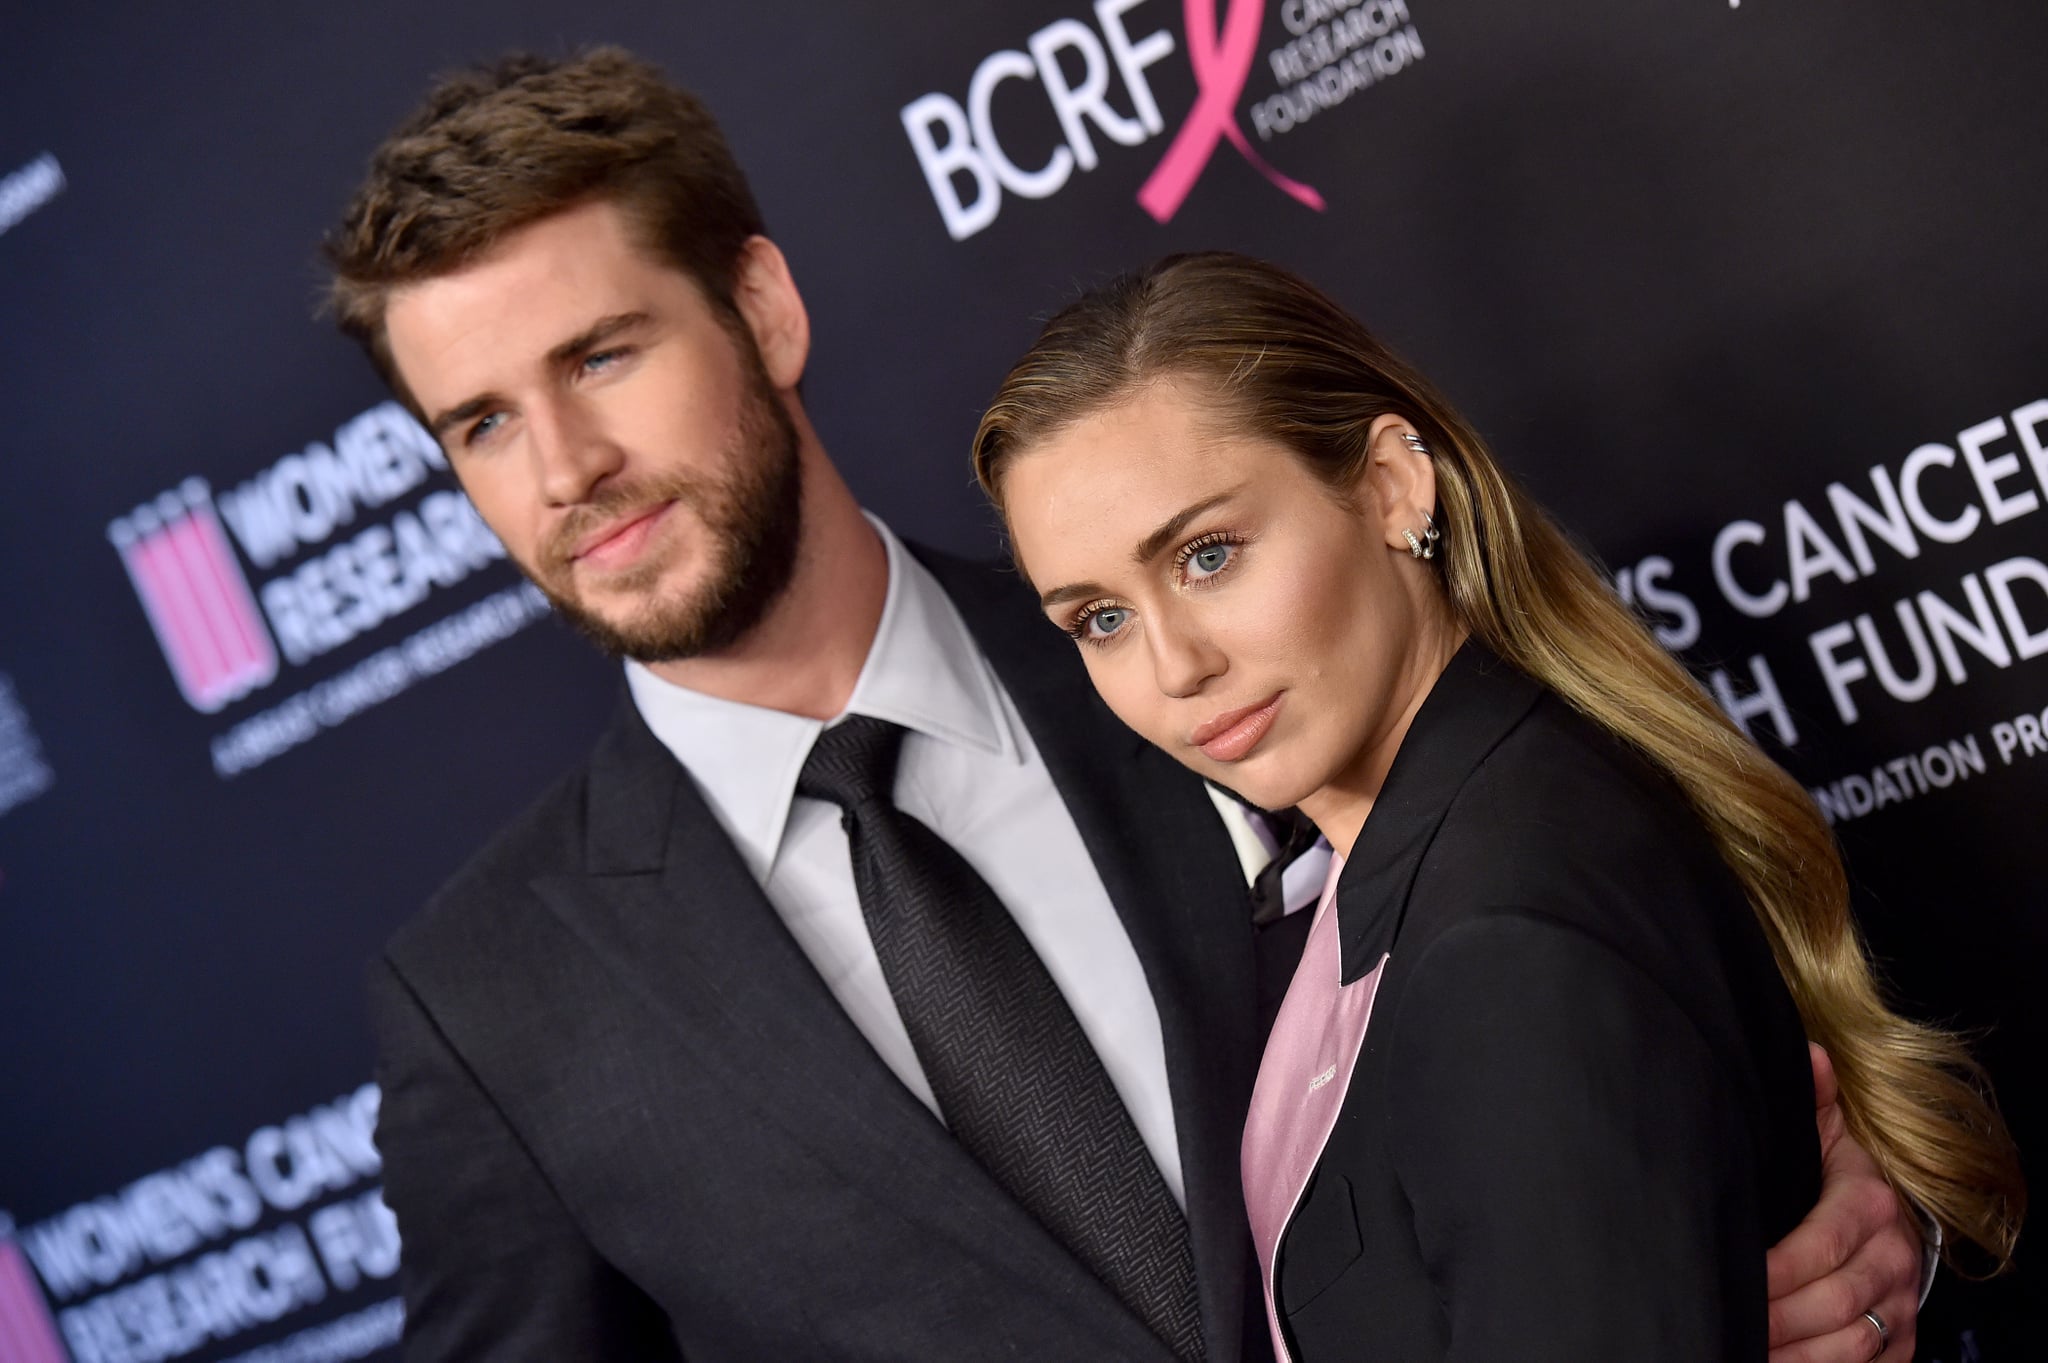 BEVERLY HILLS, CALIFORNIA - FEBRUARY 28: Liam Hemsworth and Miley Cyrus attend The Women